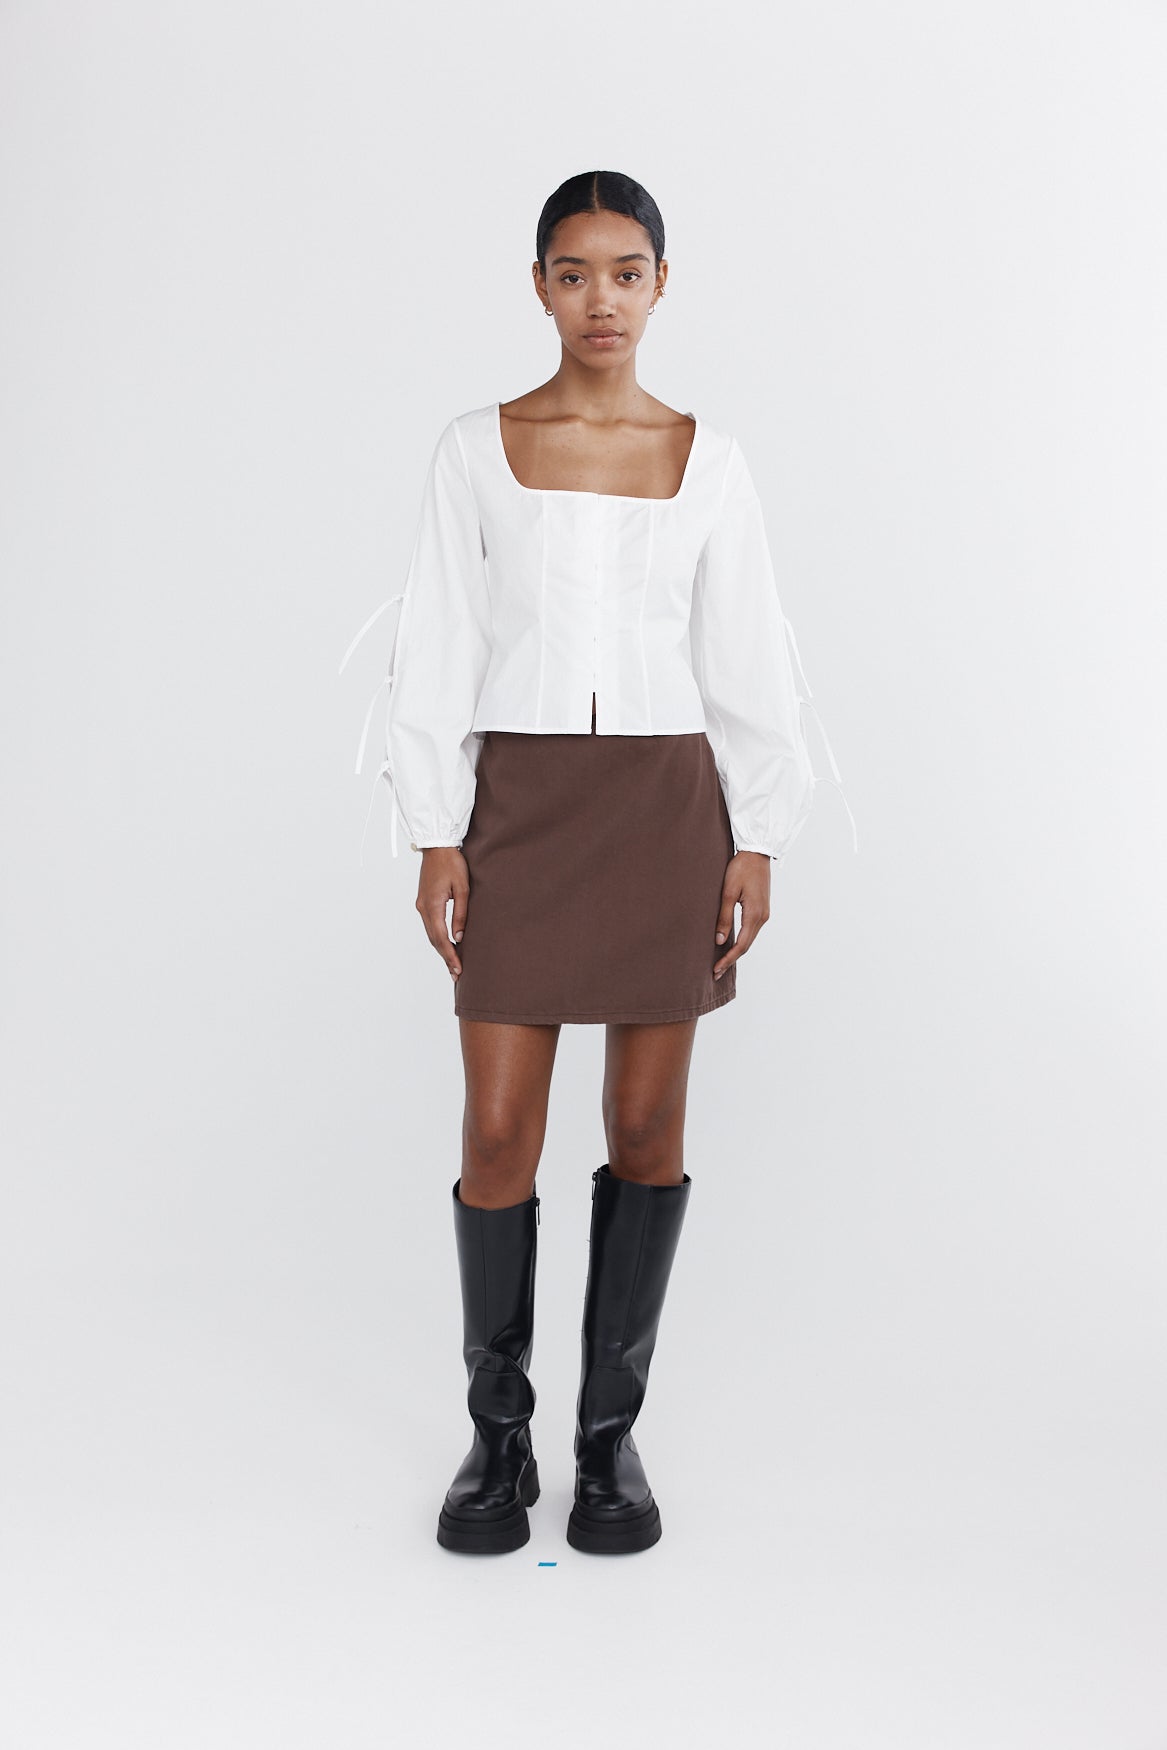 Marle | Claudette Top - Ivory